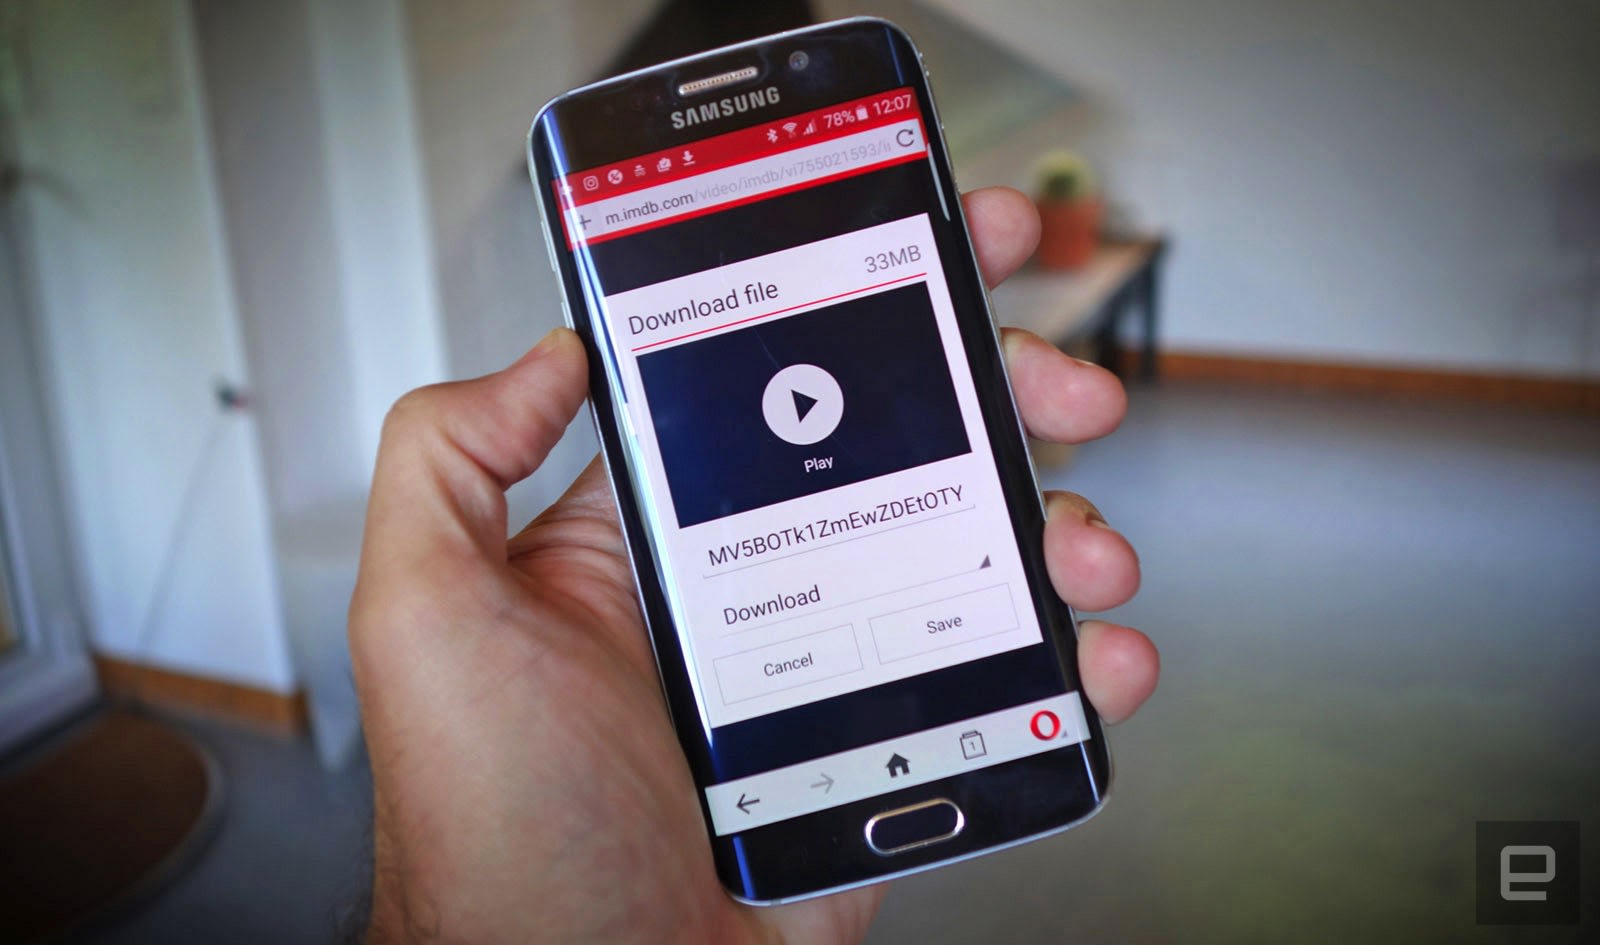 Opera Mini can download videos for offline viewing